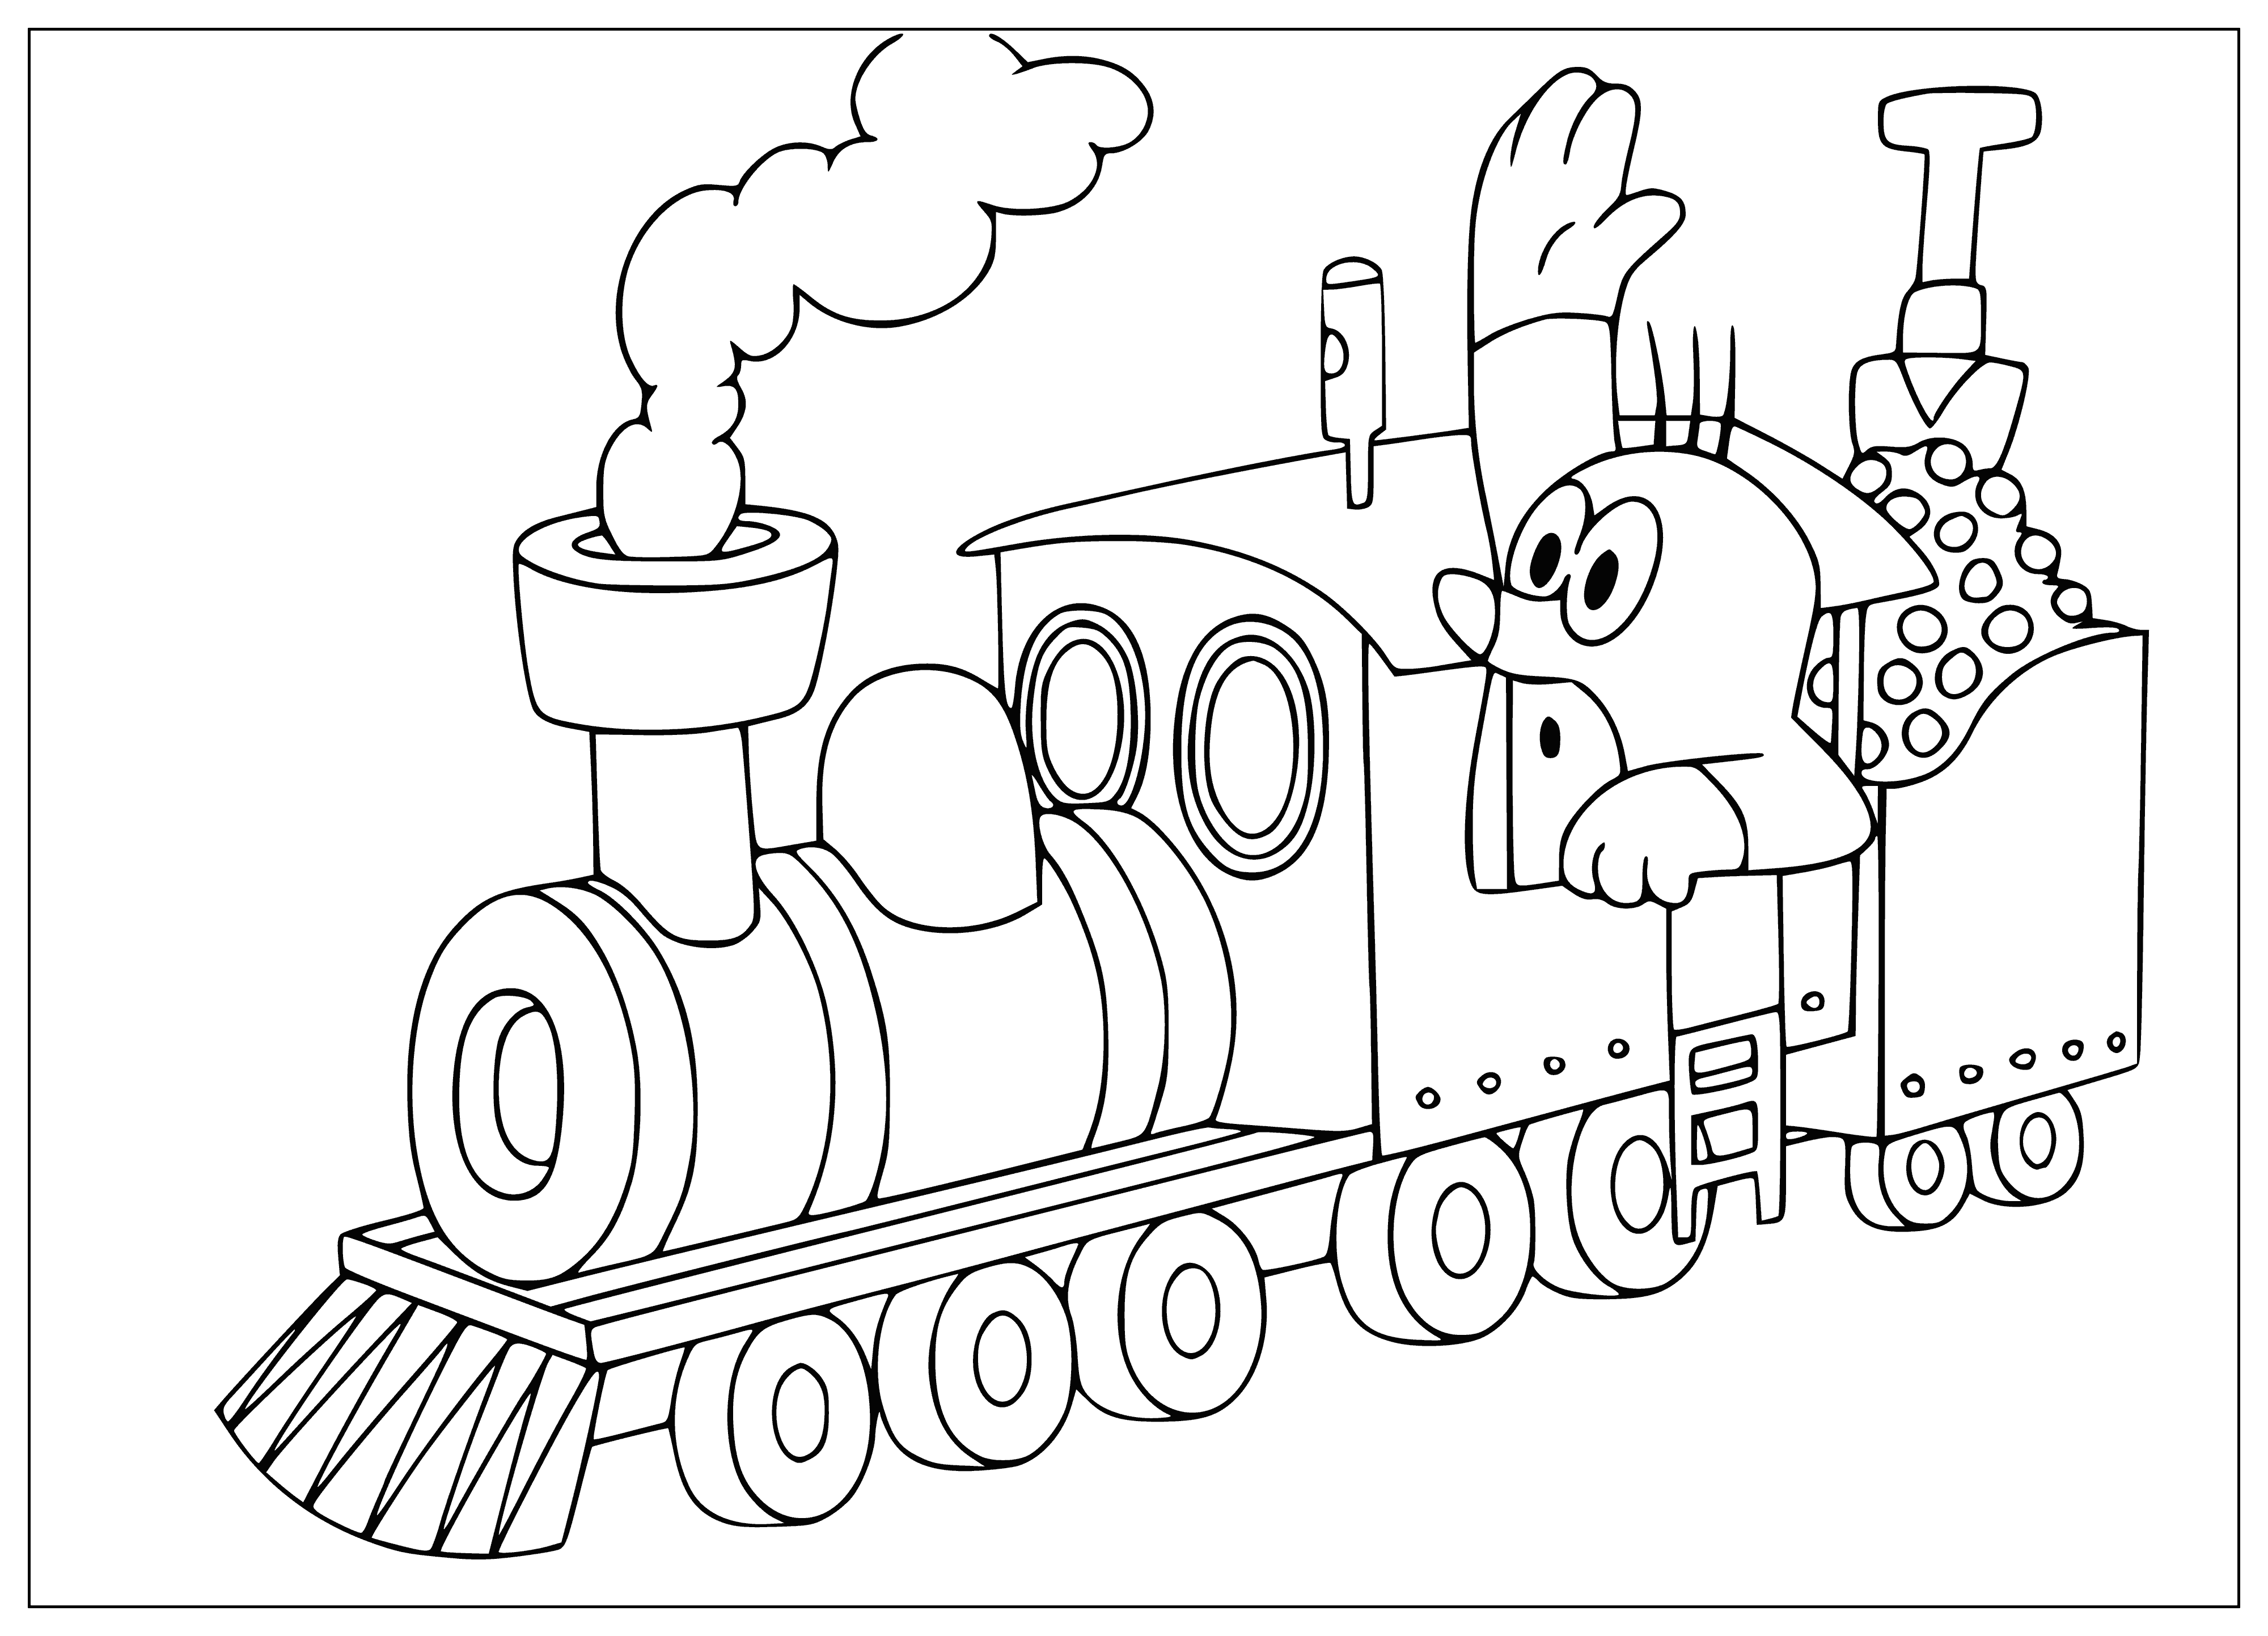 Mole and steam locomotive coloring page